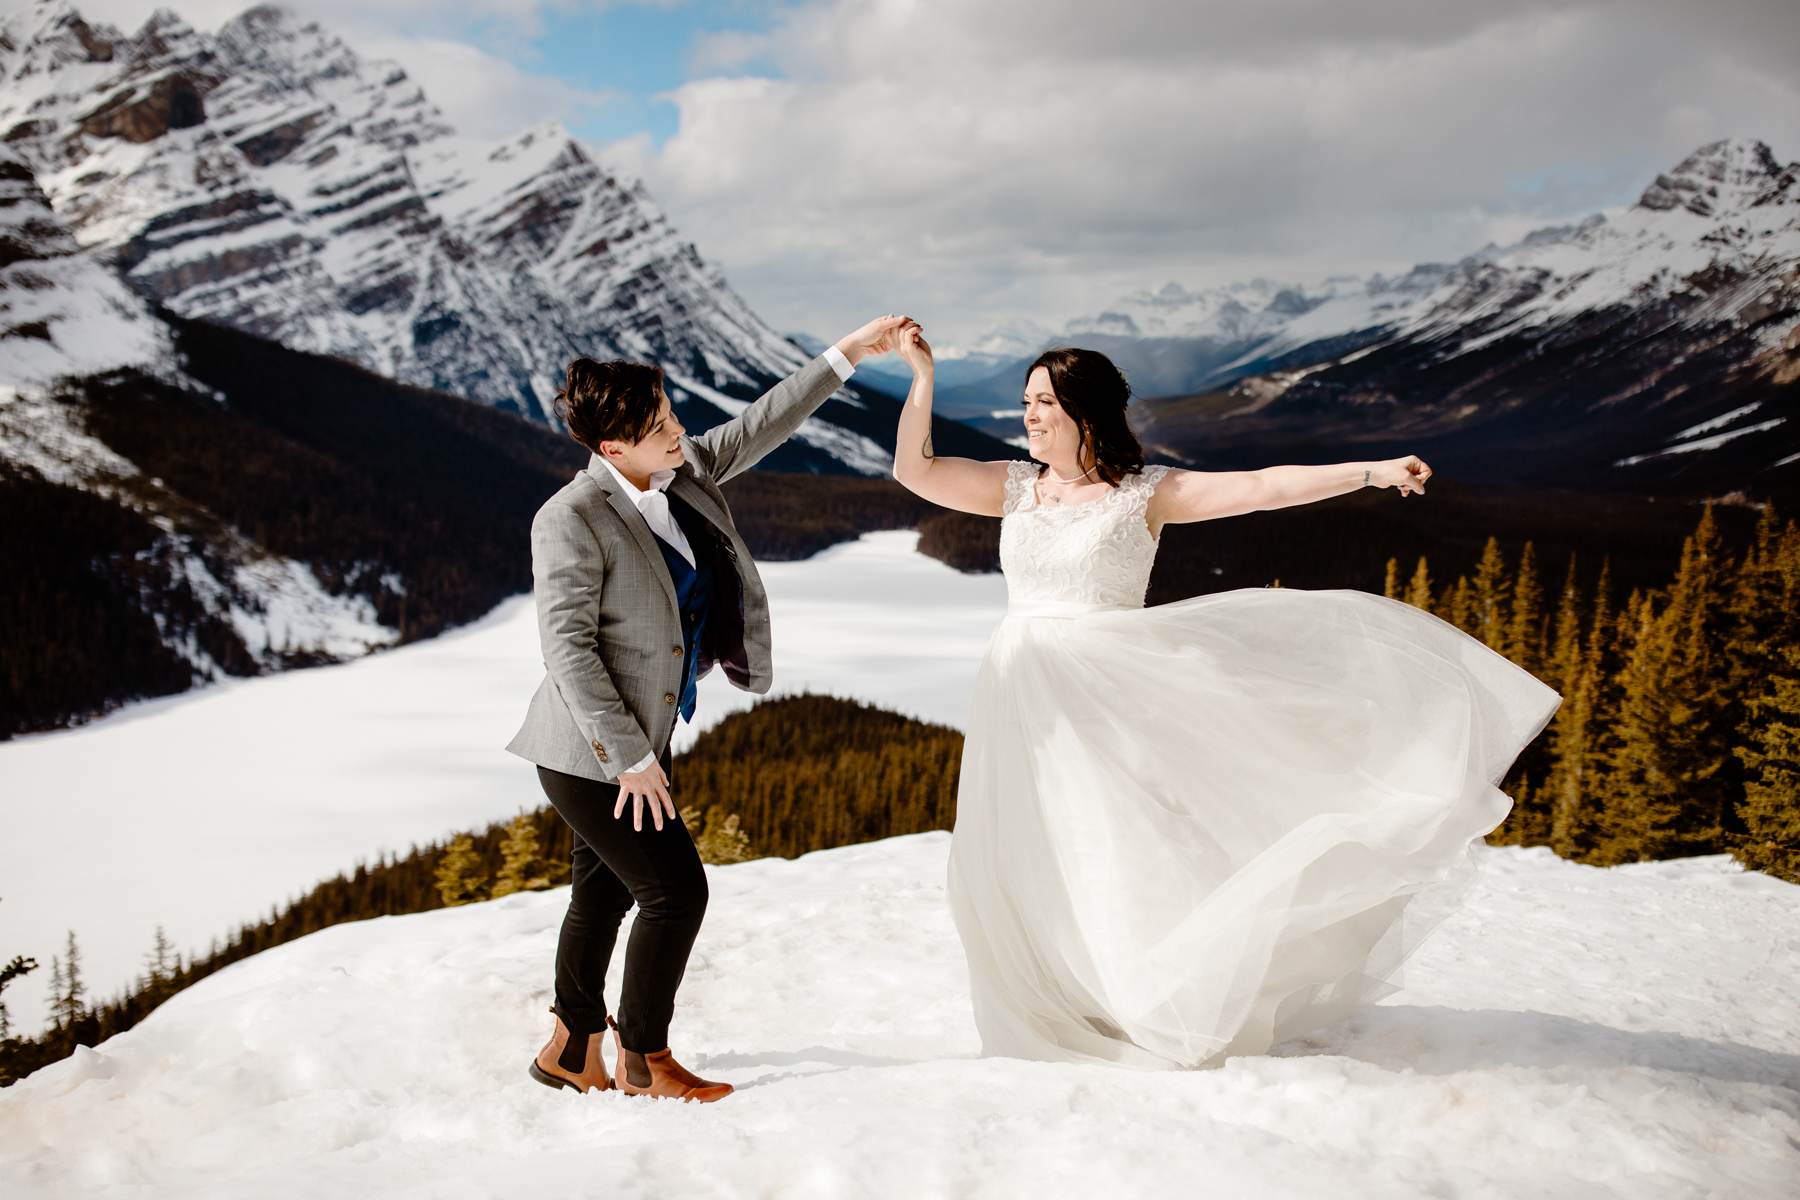 Banff National Park Elopement Photography with LGBTQ-friendly photographers - Image 13